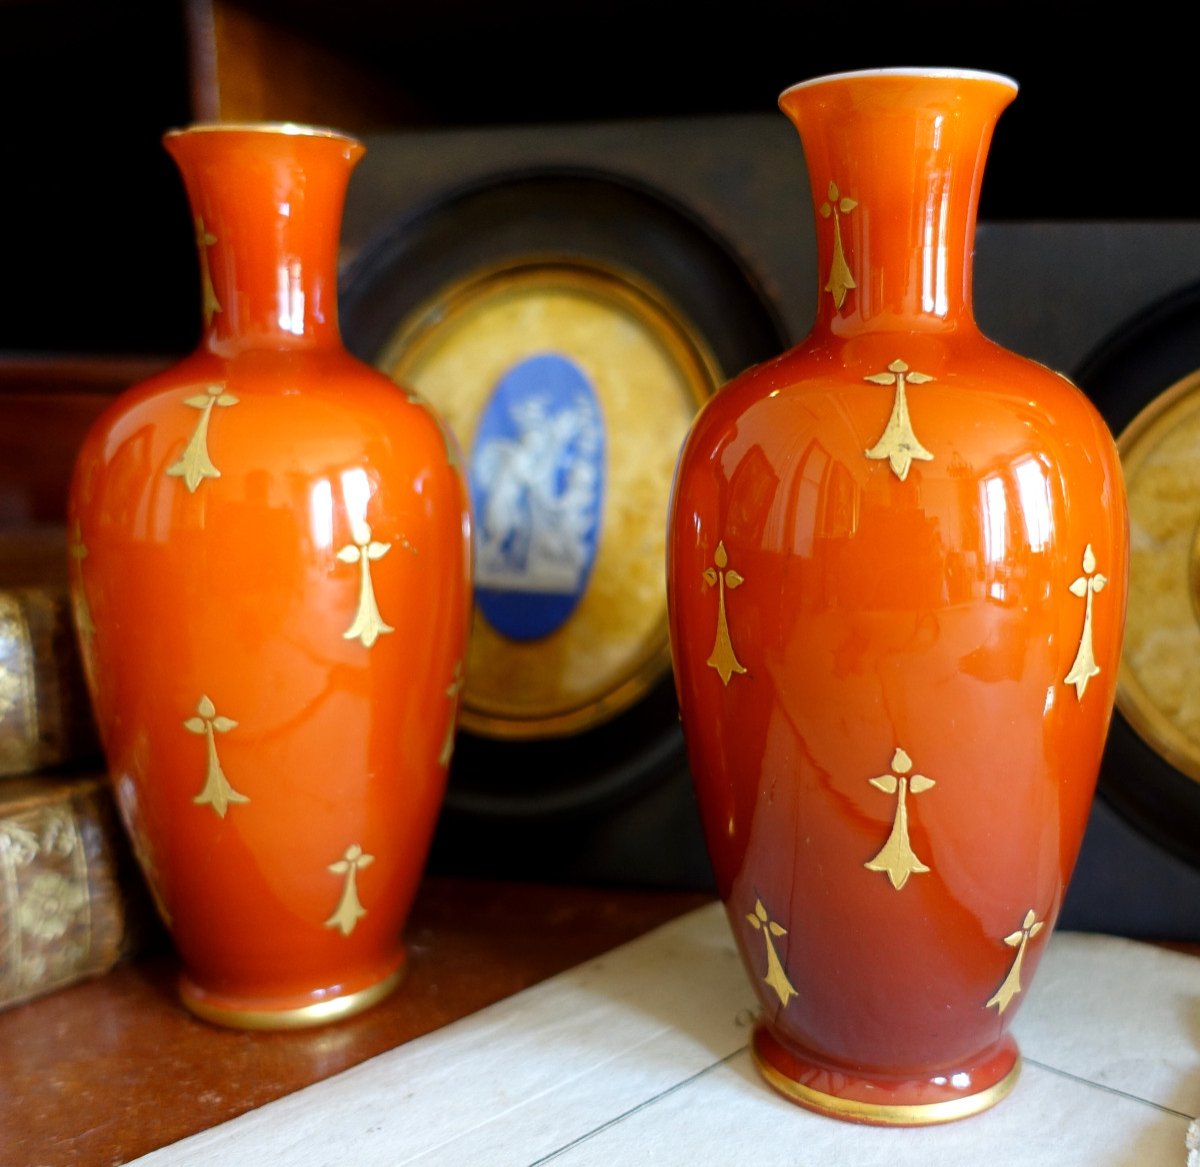 Baccarat - Pair Of Orange And Gold Opaline Vases - 1900 Period-photo-3